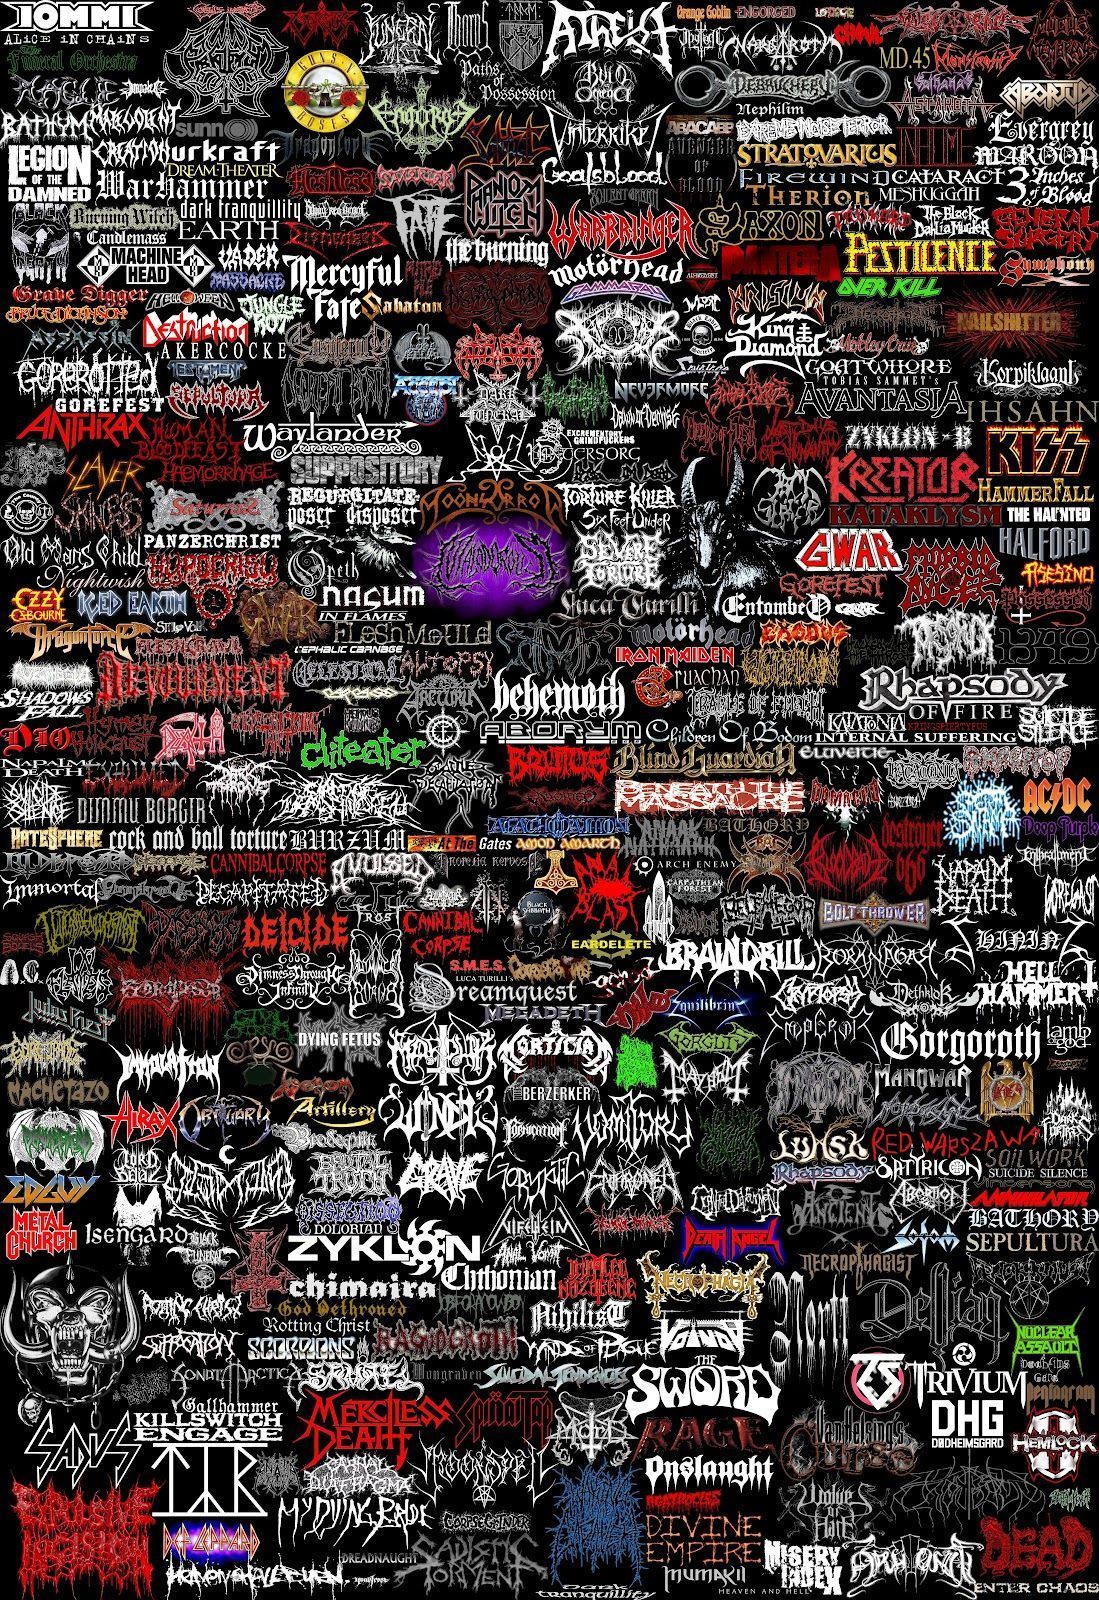 80s Bands Wallpaper Free 80s Bands Background